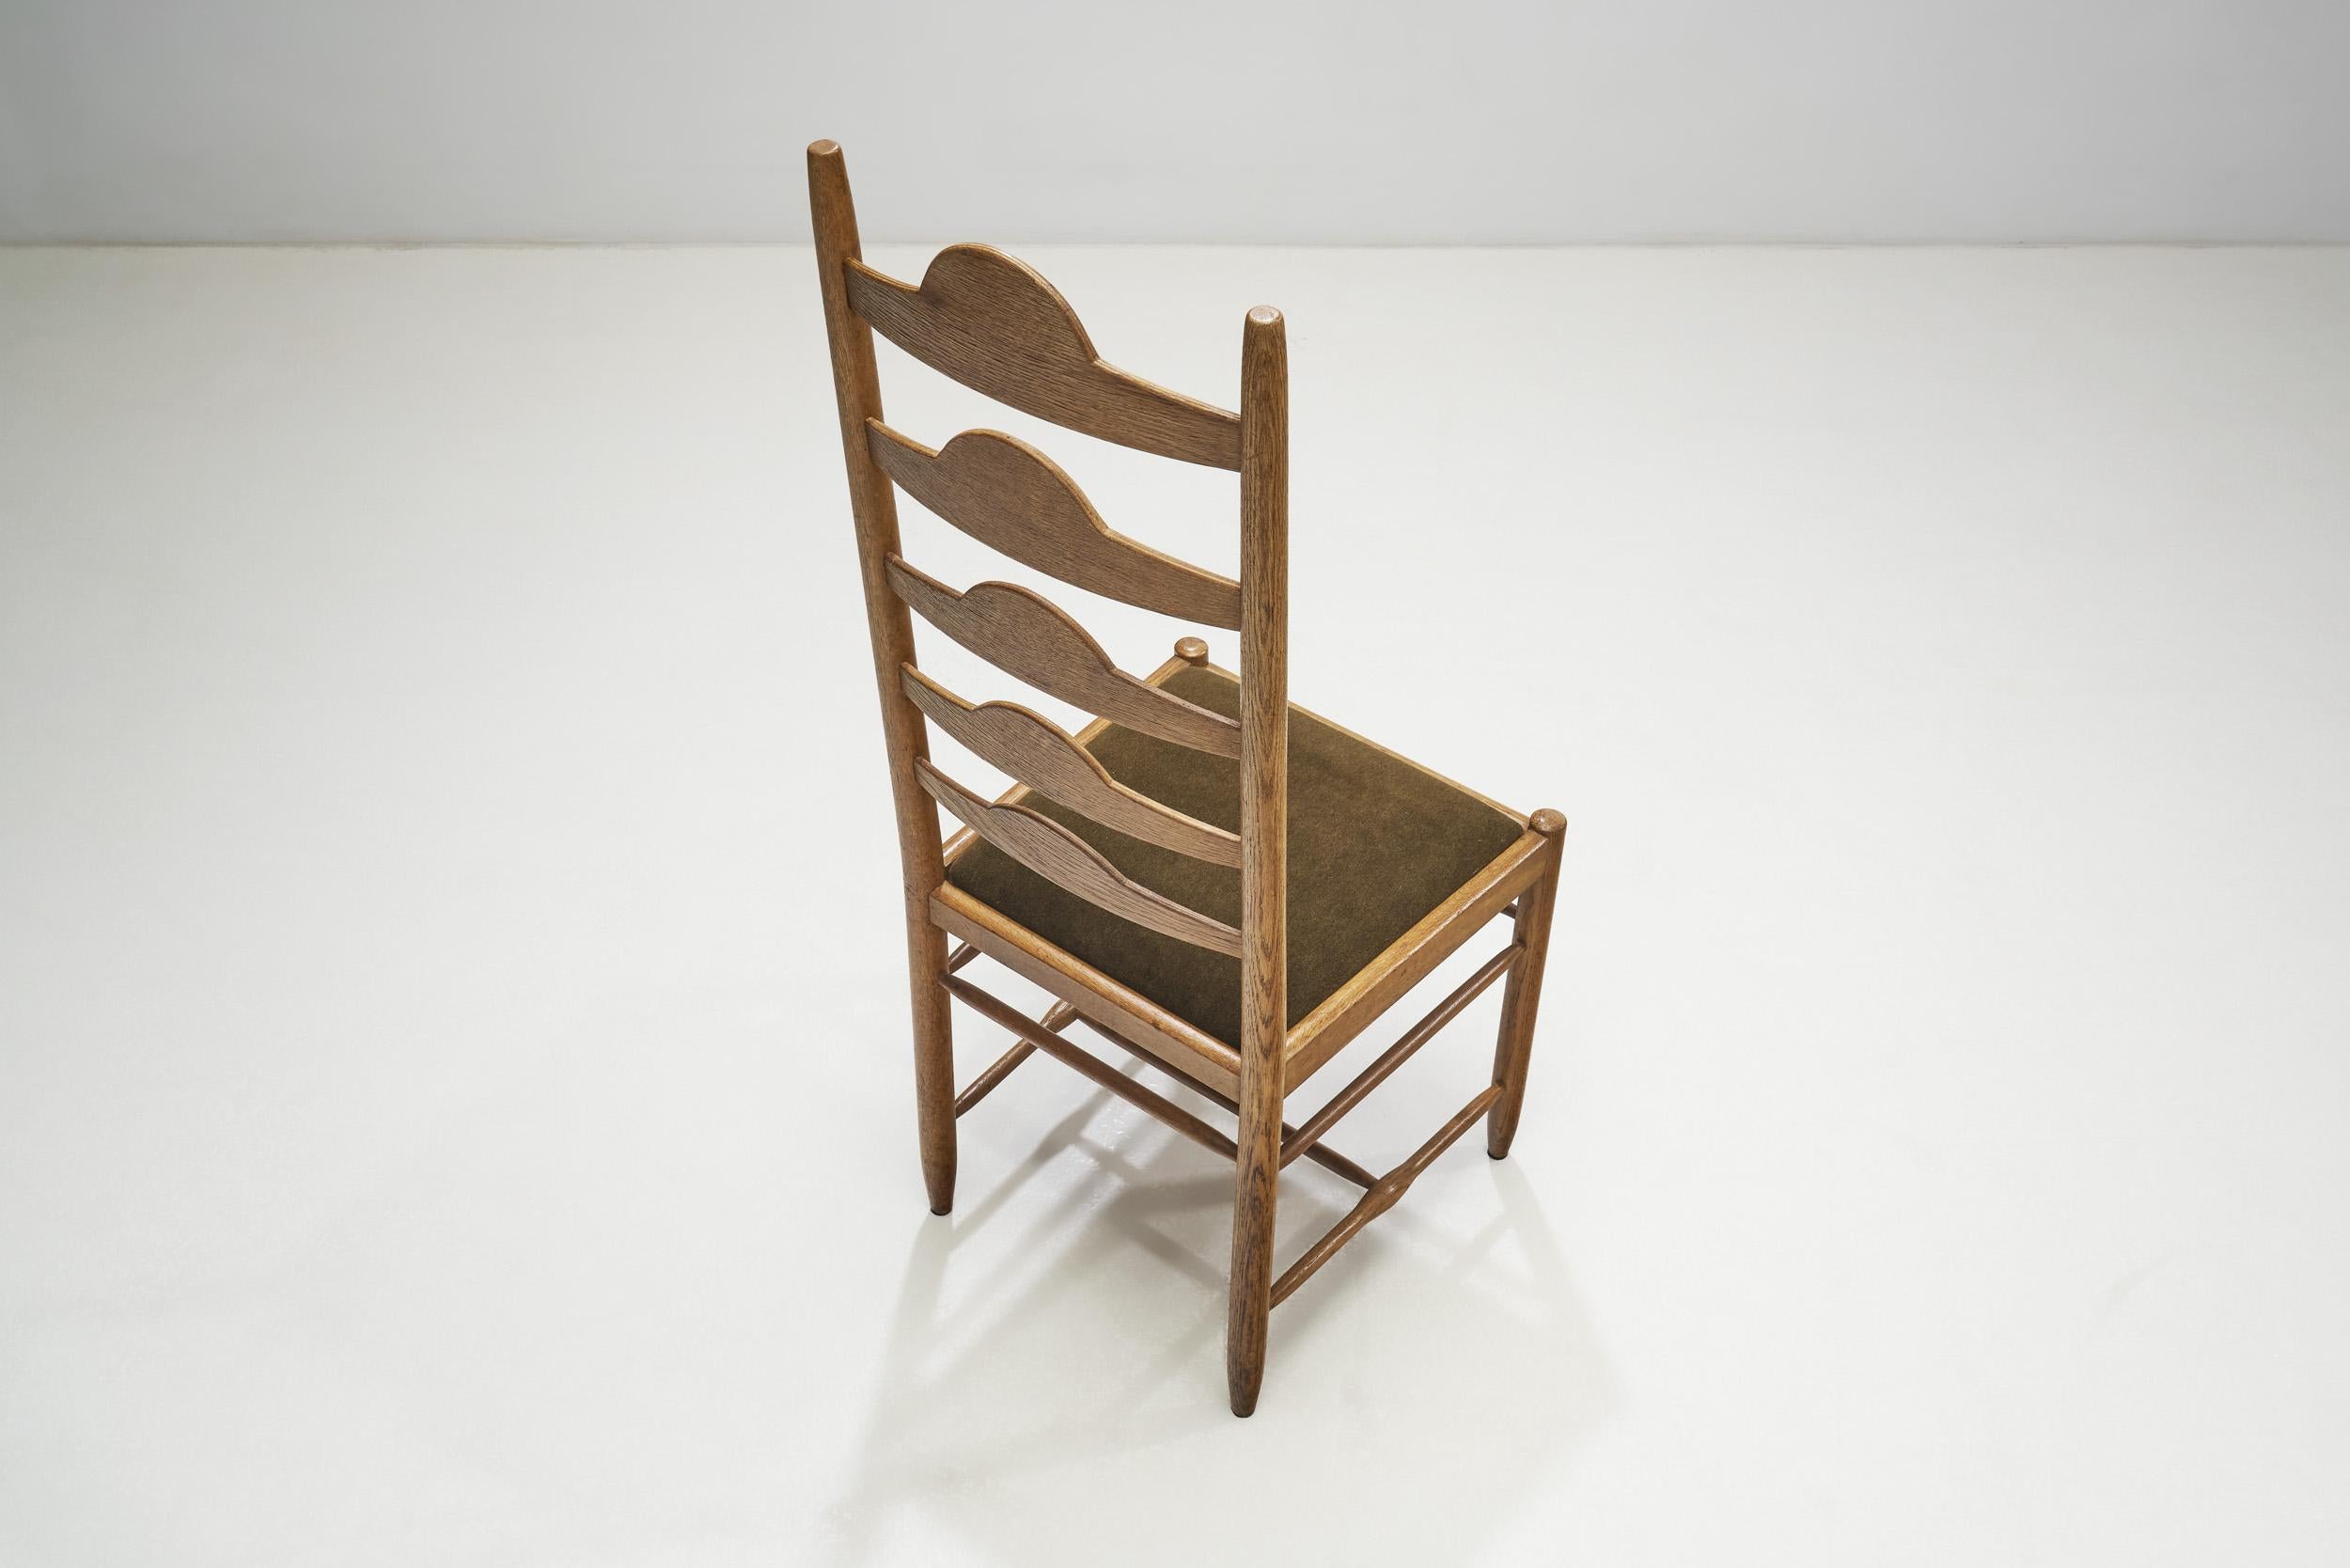 20th Century Sculptural Ladder-Back Chairs, Europe first half of the 20th century For Sale